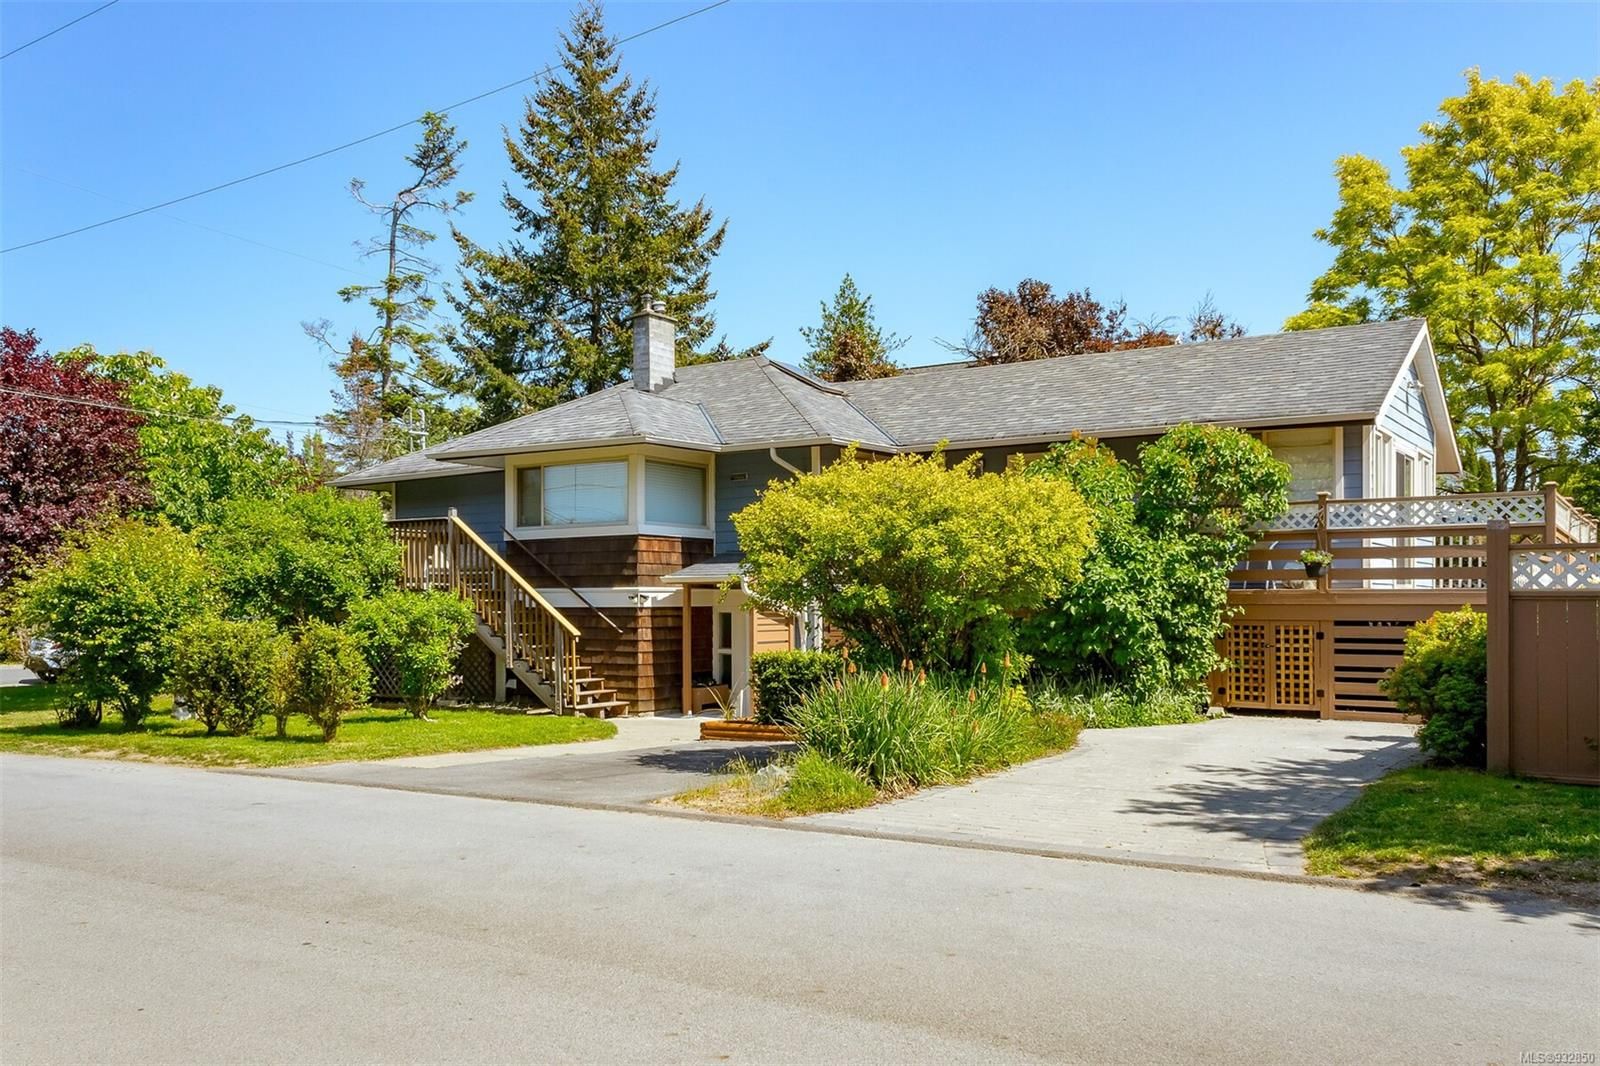 New property listed in SW Gorge, Saanich West